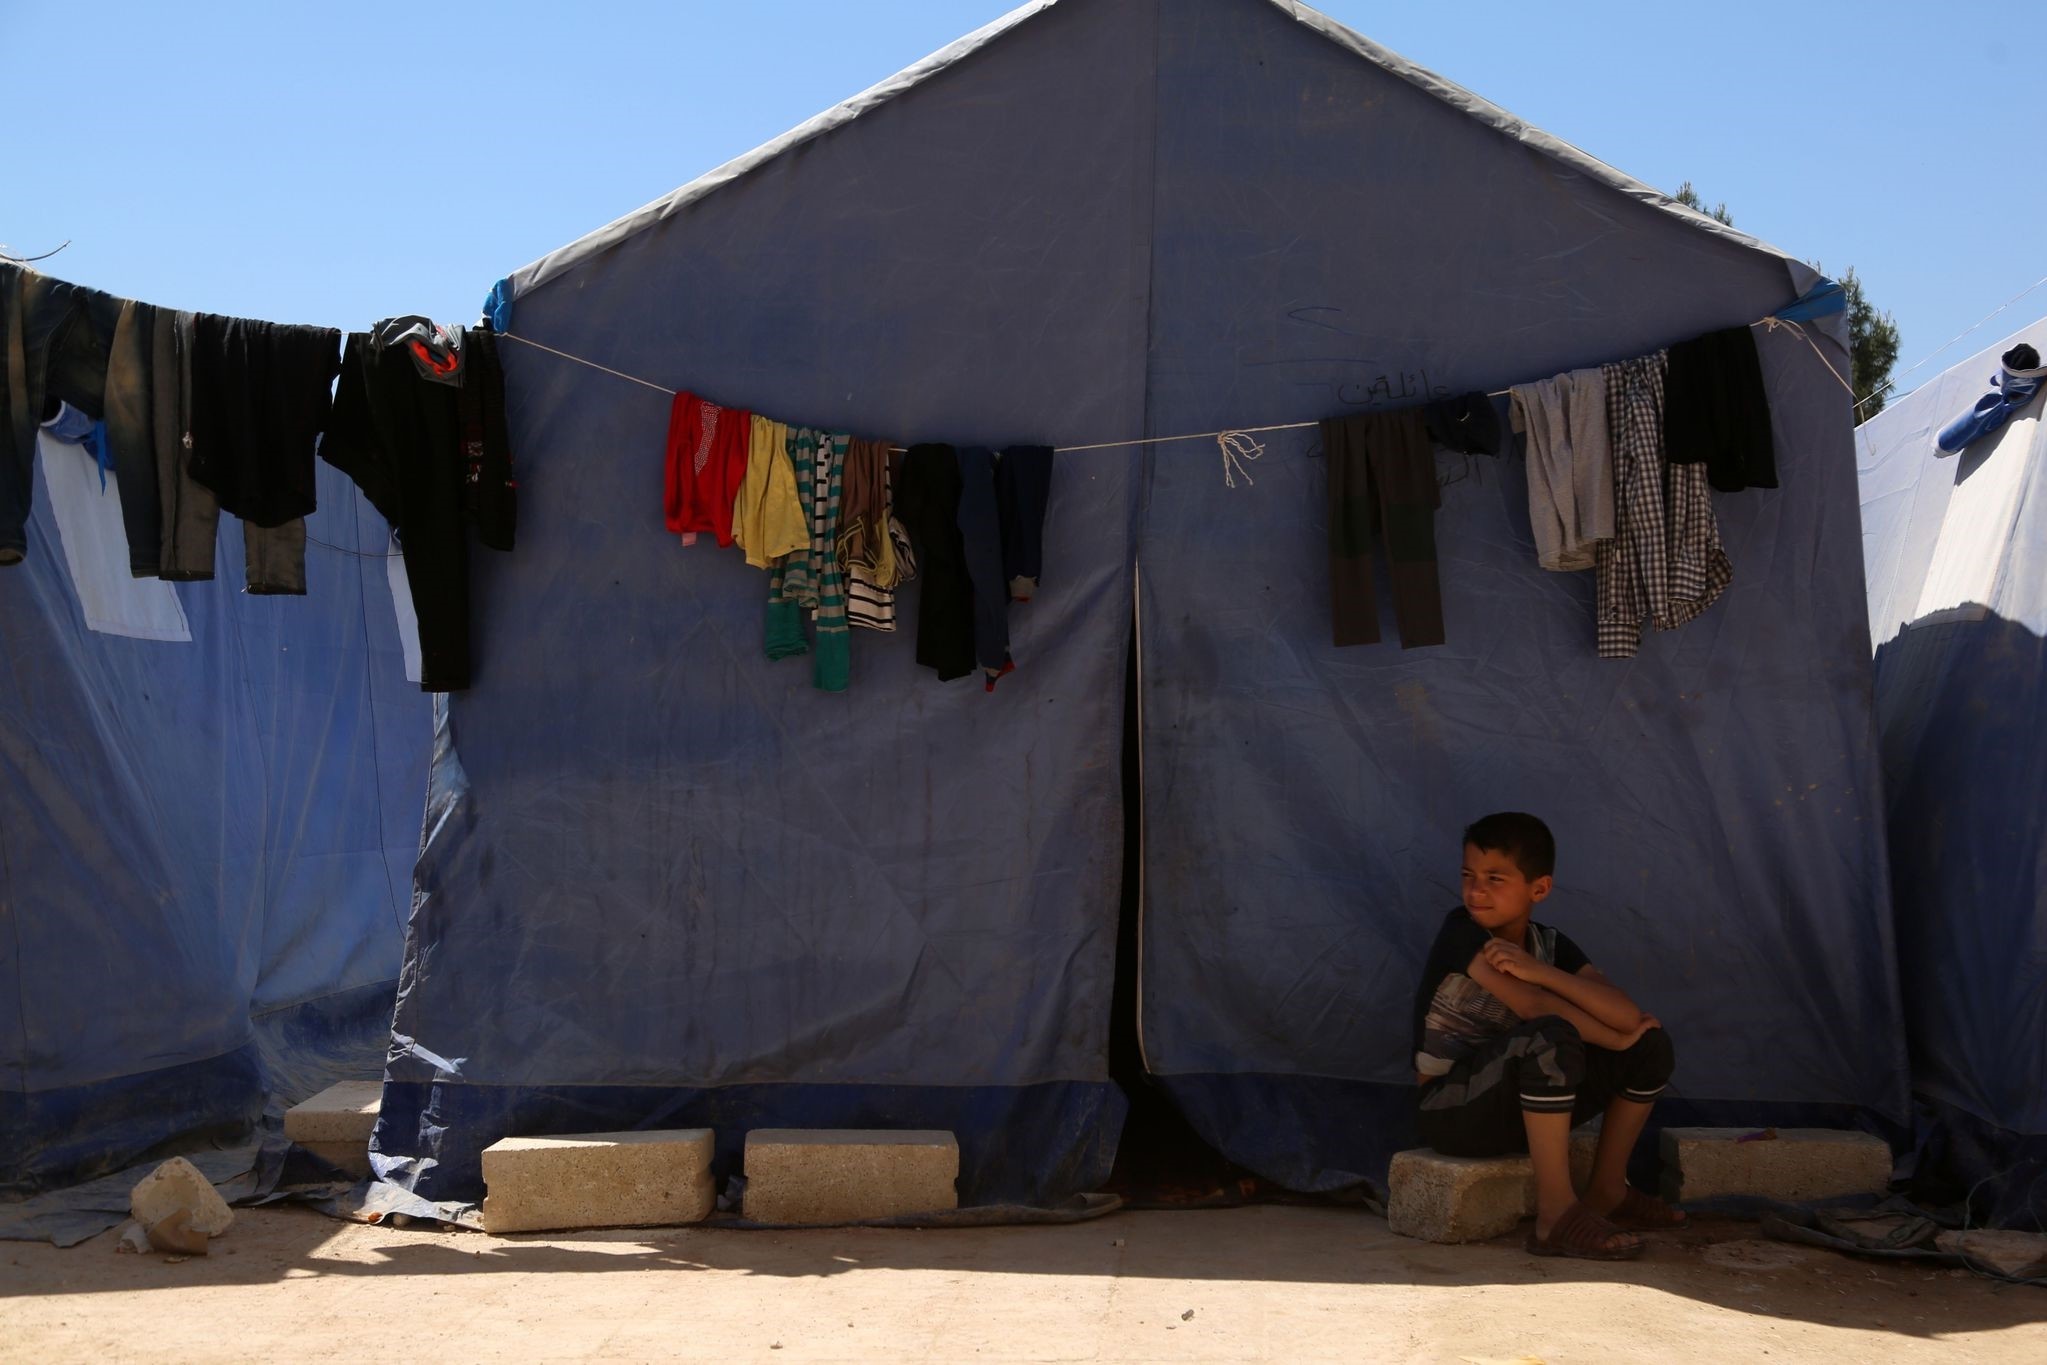 A Syrian boy, displaced from Ghouta following regime chemical weapons attacks, sits outside a tent in a make-shift camp built inside a school in Atareb, northern Syria, April 7.